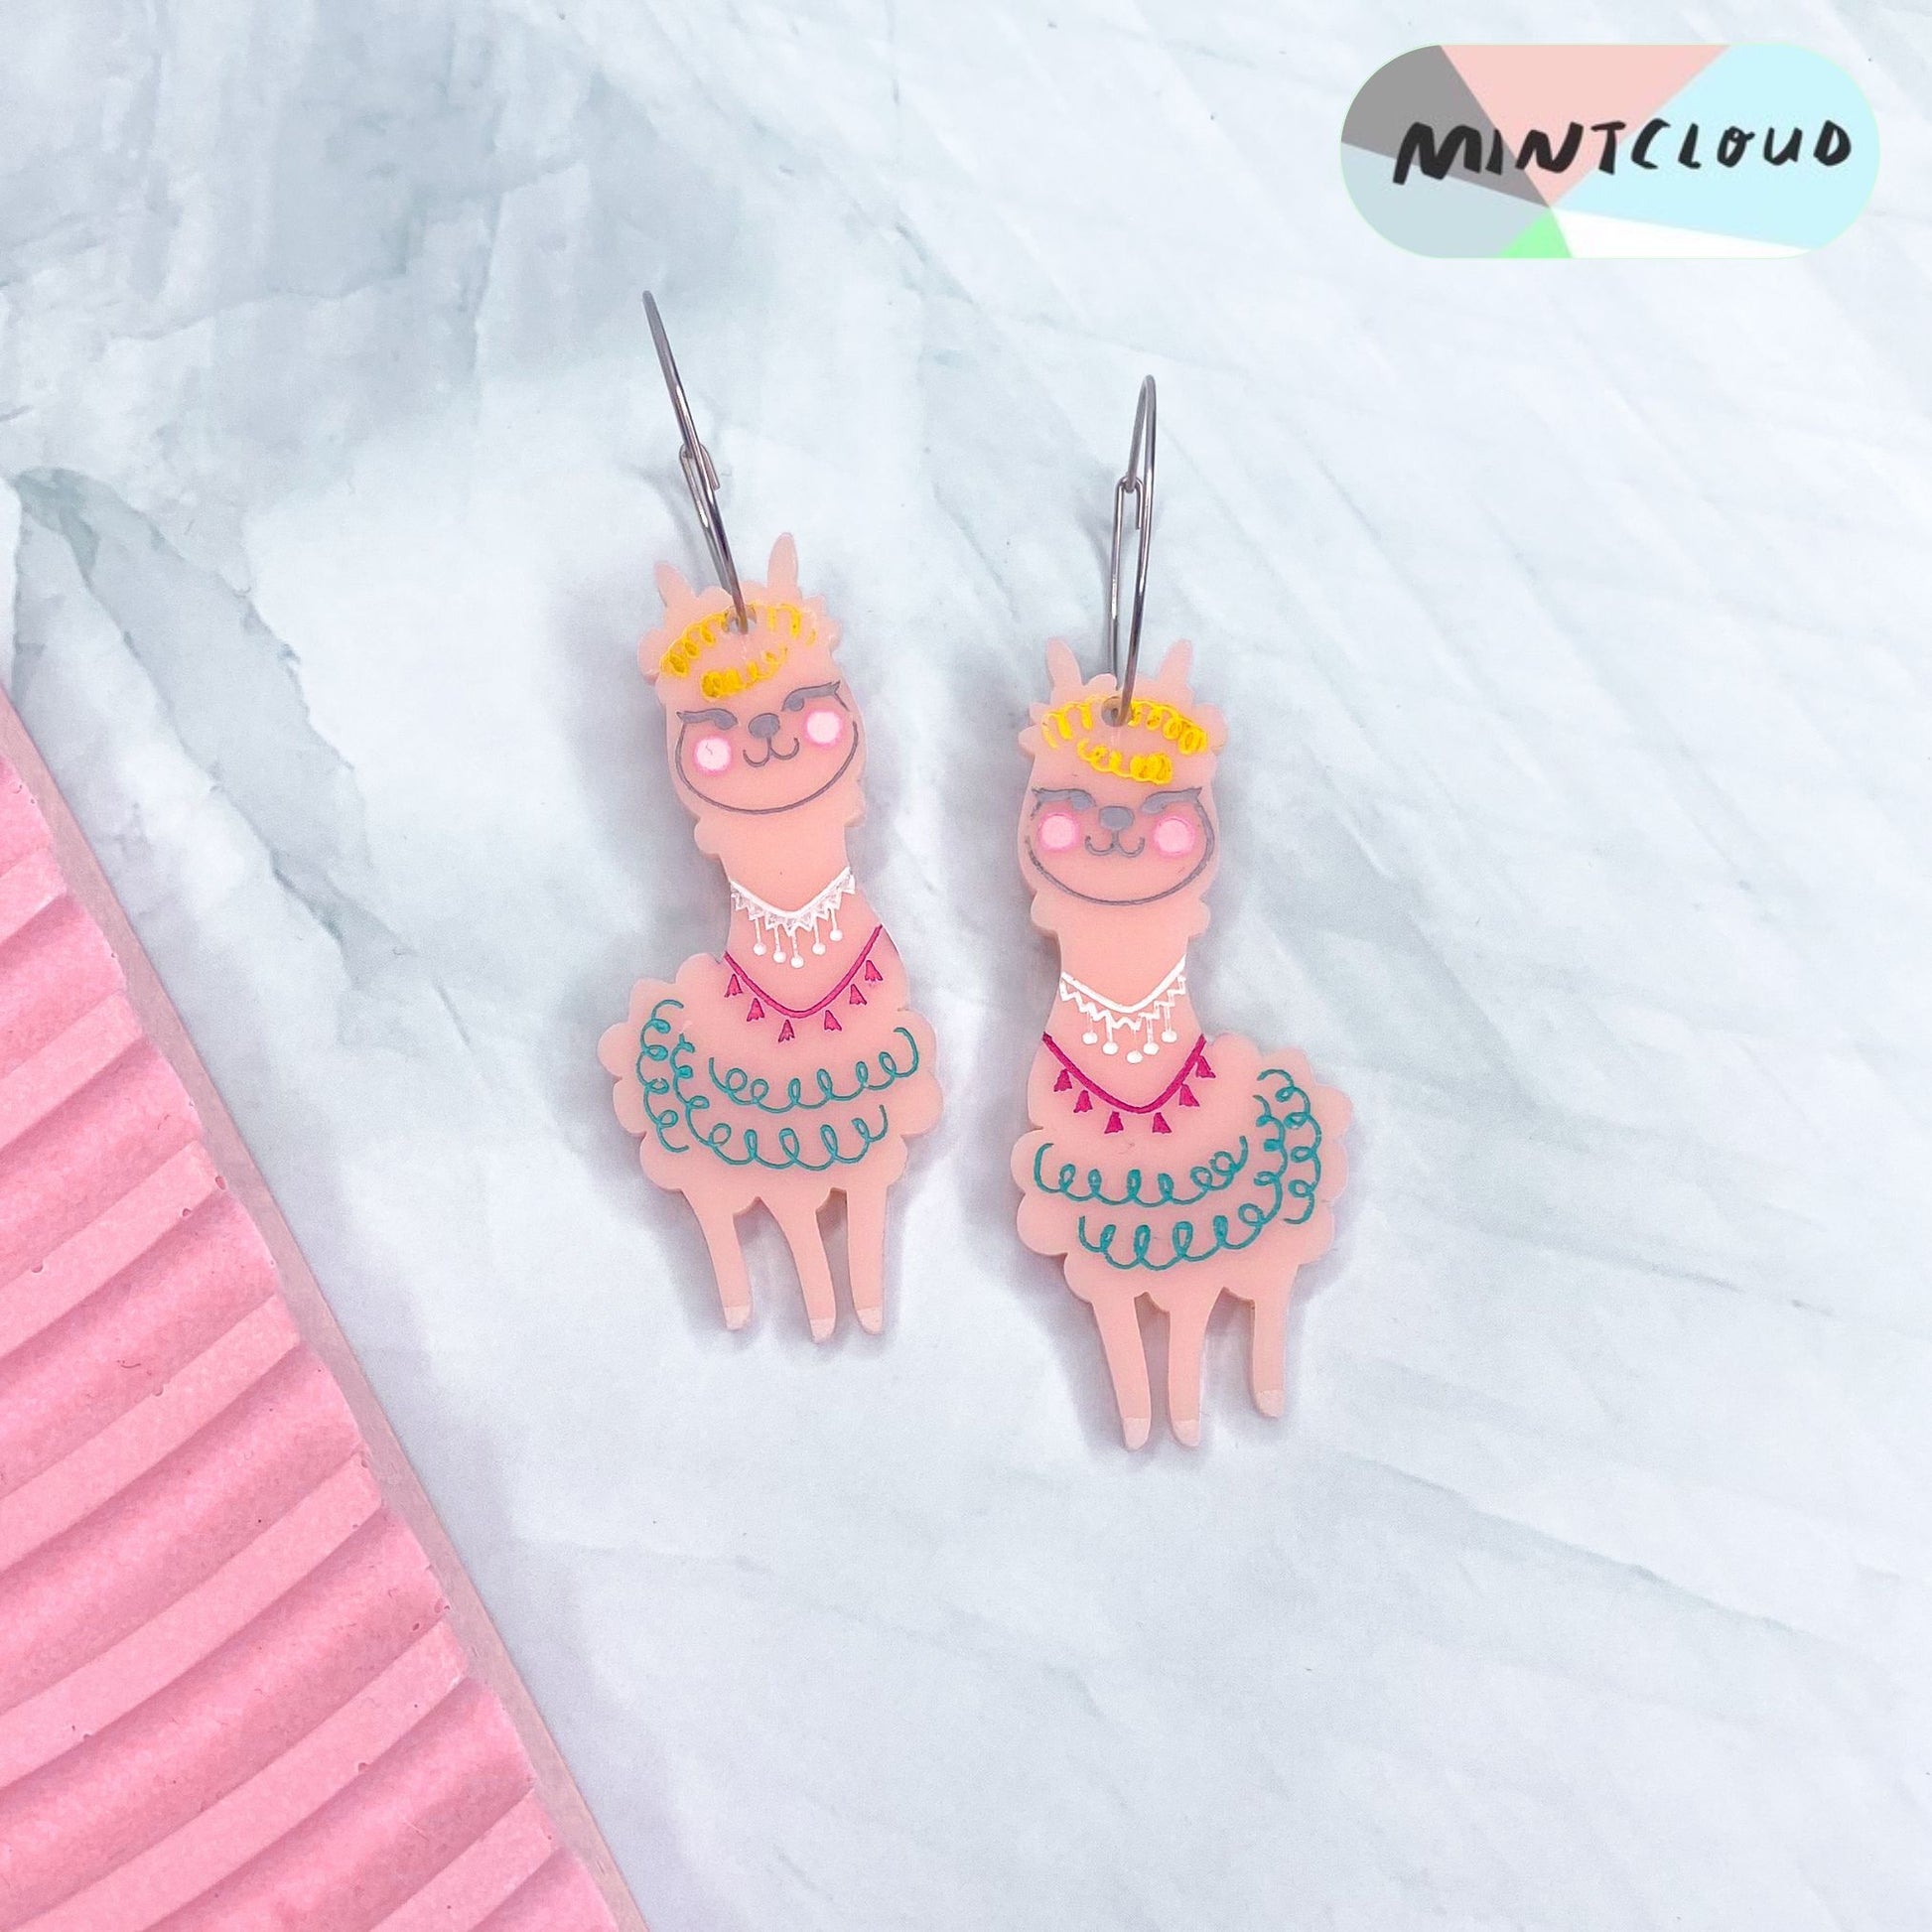 Festive Hand Painted Alpaca Dangles - Various Colours From Mintcloud Studio, an online jewellery store based in Adelaide South Australia